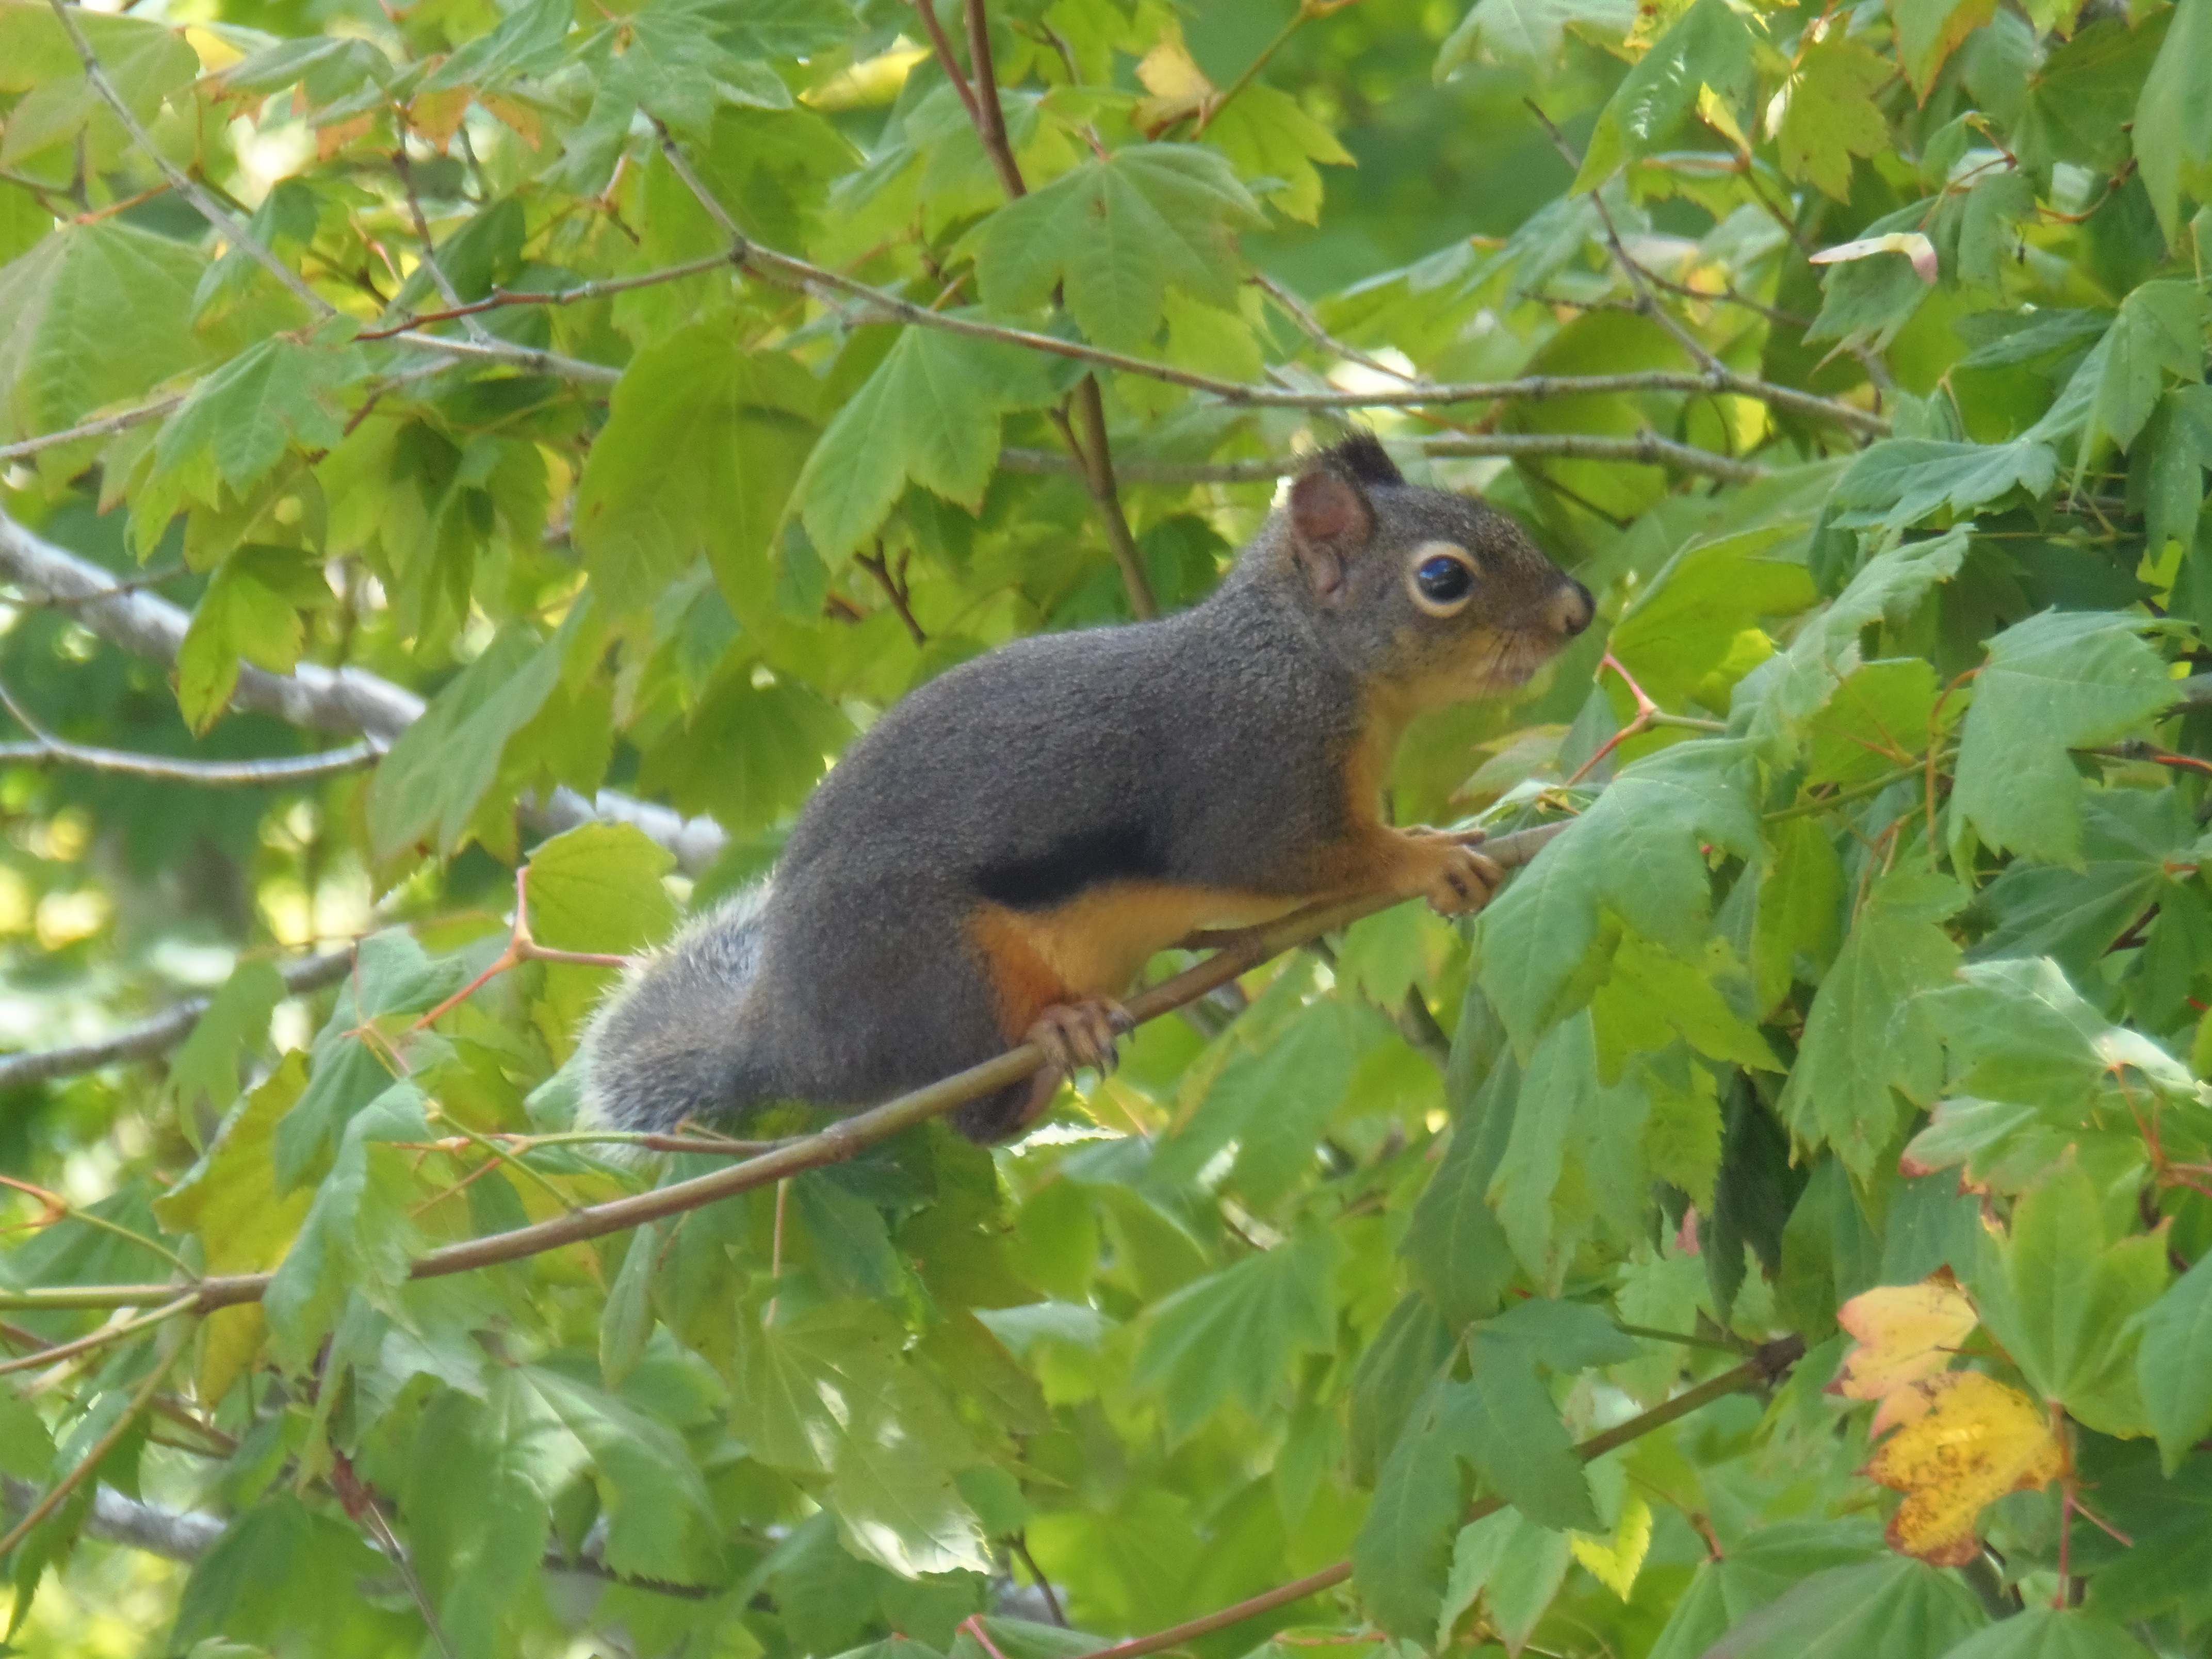 A squirrel clinging to a branch among green leaves